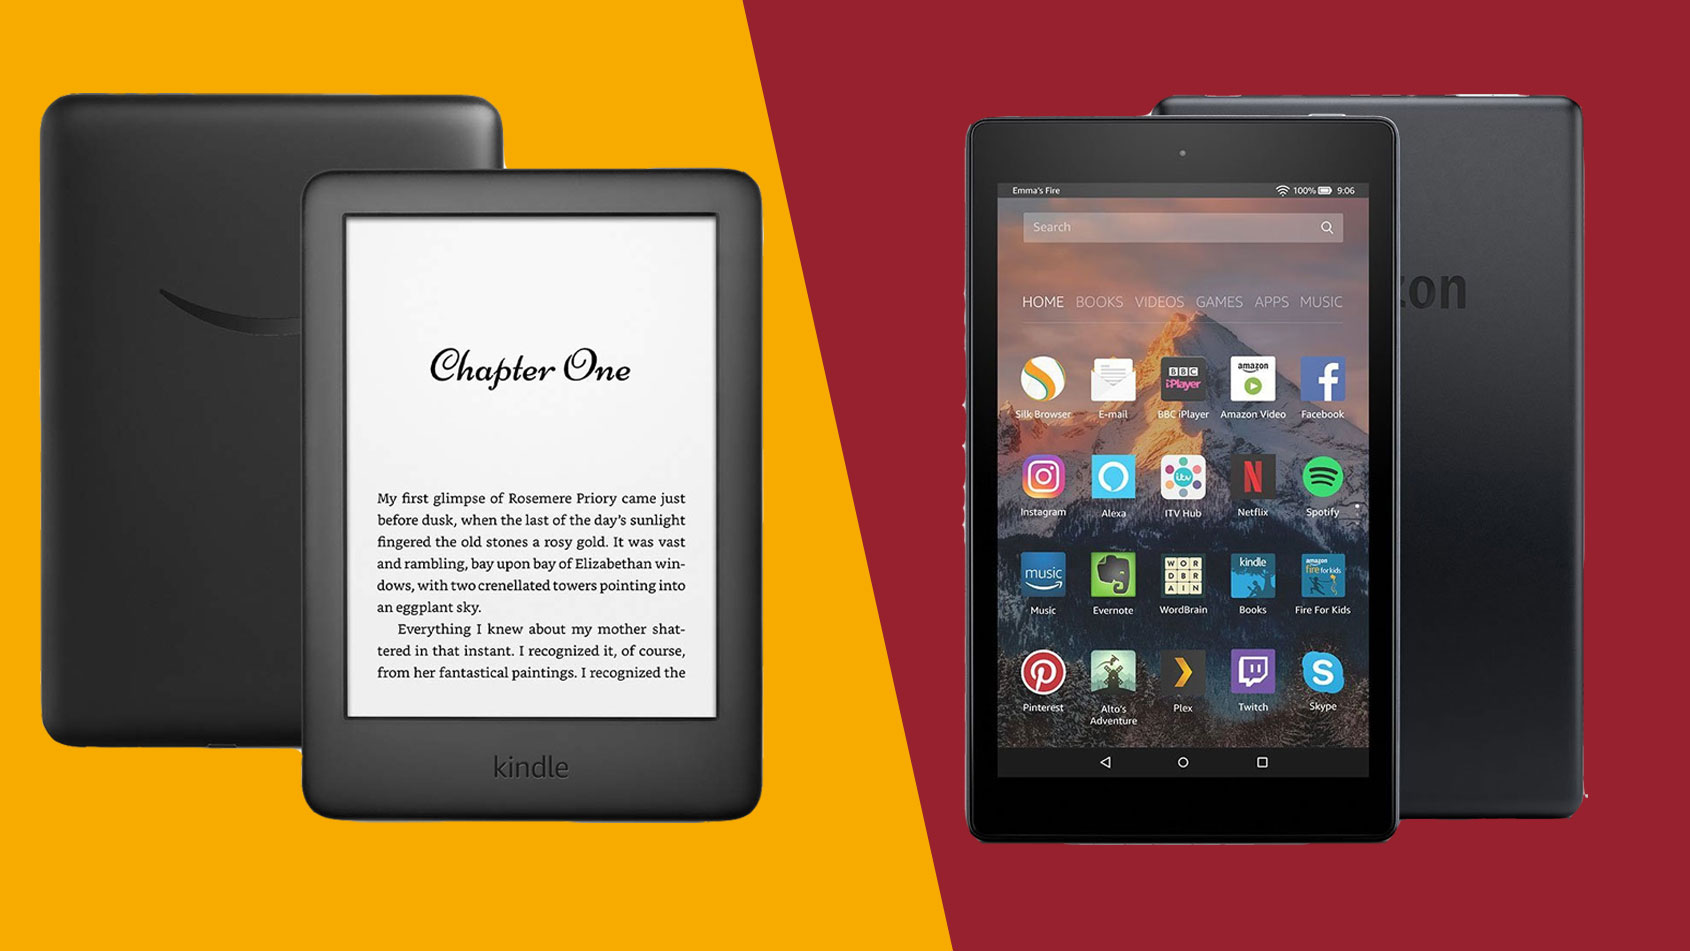 Fire HD 10 Plus: How does it compare to Apple's iPad?